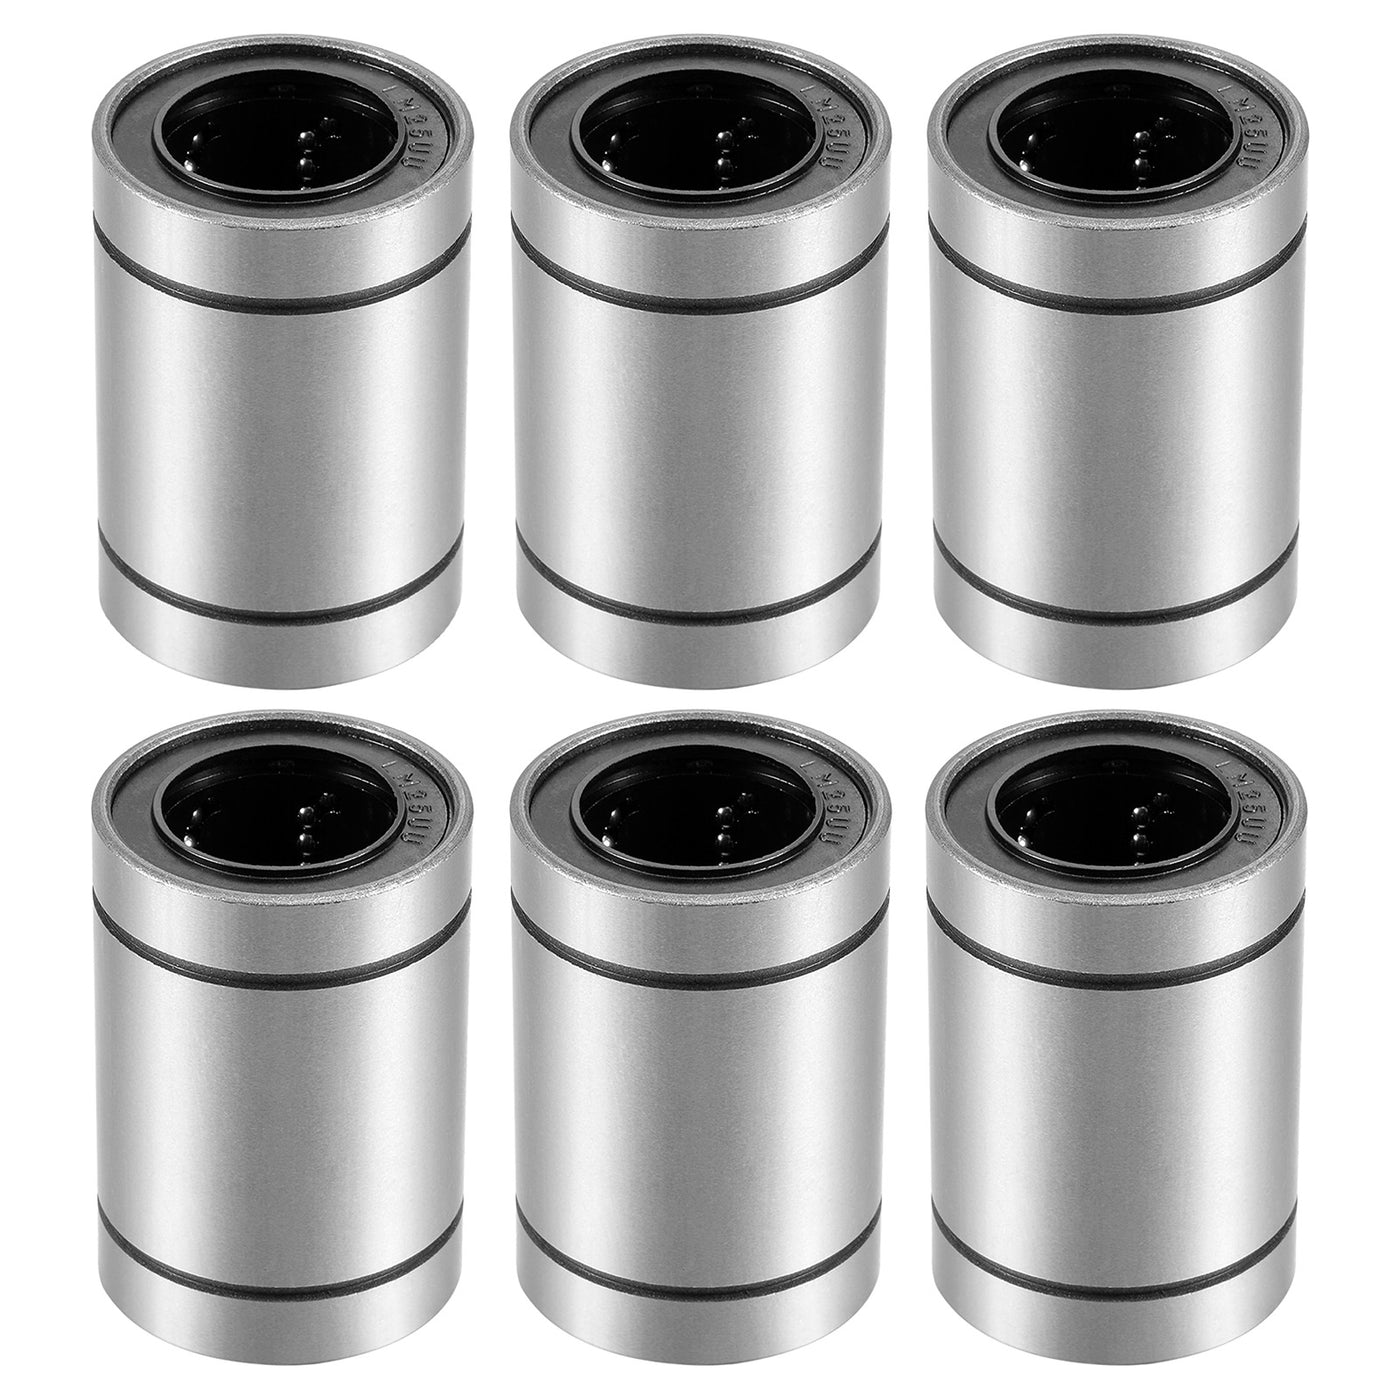 uxcell Uxcell 6pcs LM25UU Linear Ball Bearings, 25mm Bore 40mm OD 59mm Long Linear Bearing for CNC, 3D Printer